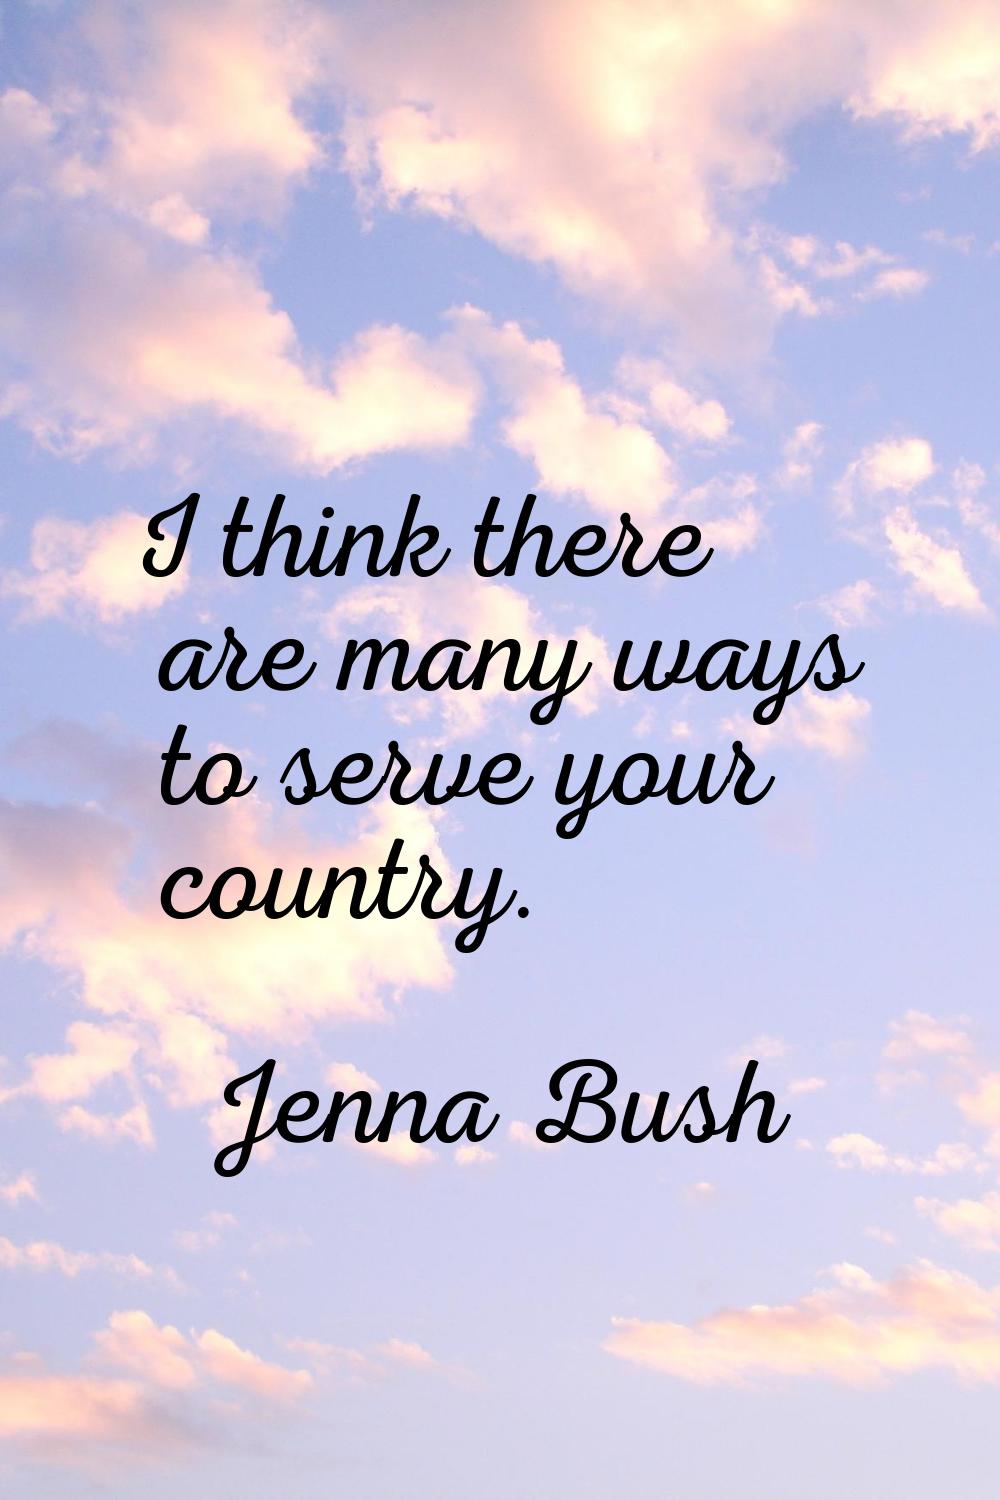 I think there are many ways to serve your country.